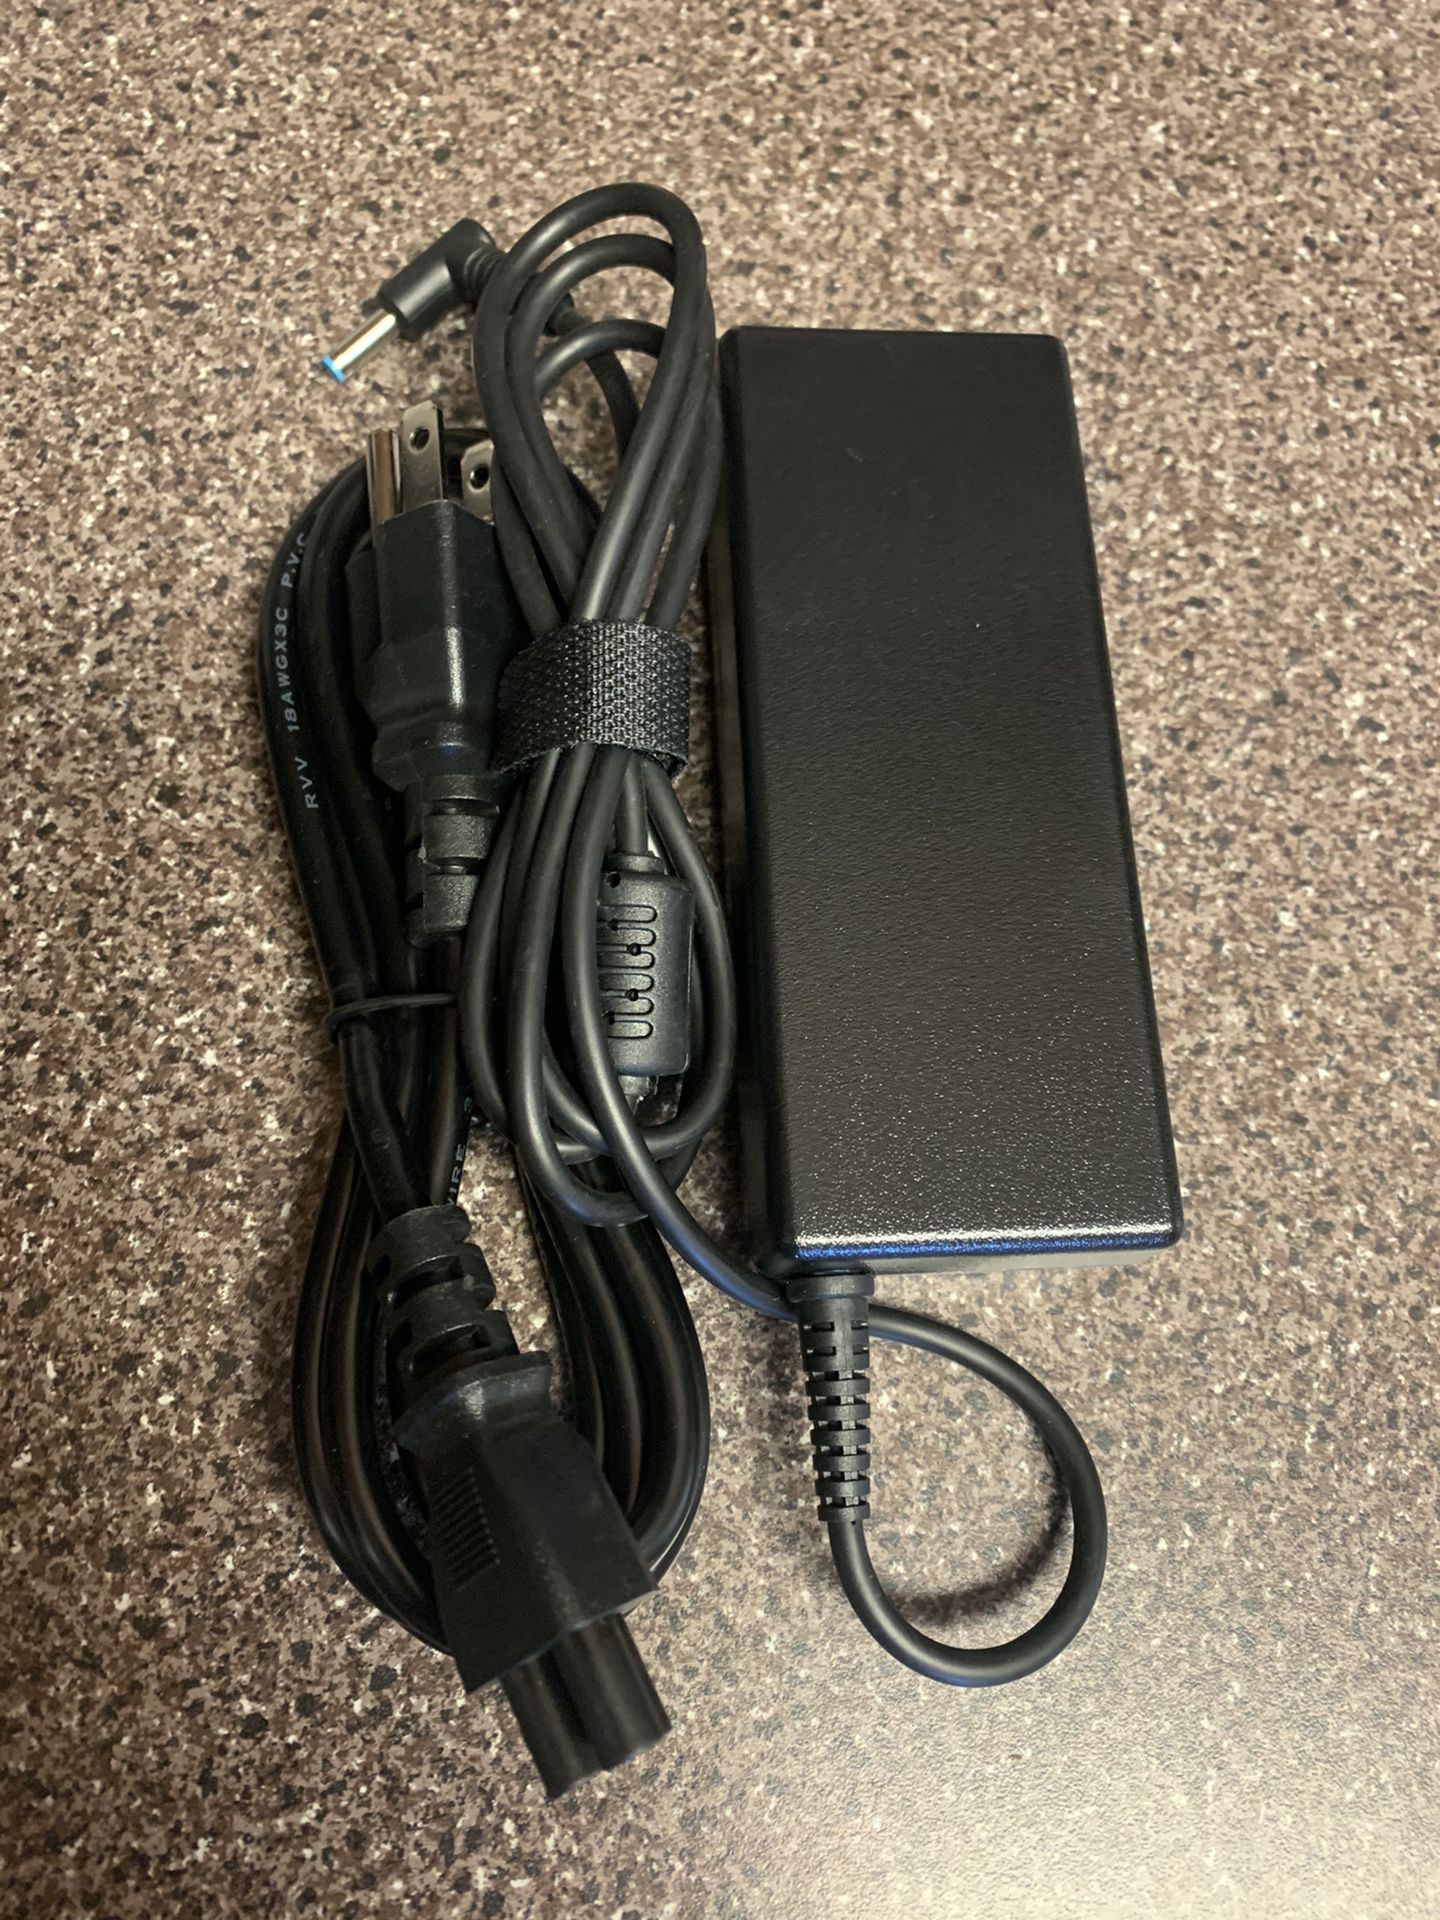 Brand New! Hp Laptop Charger